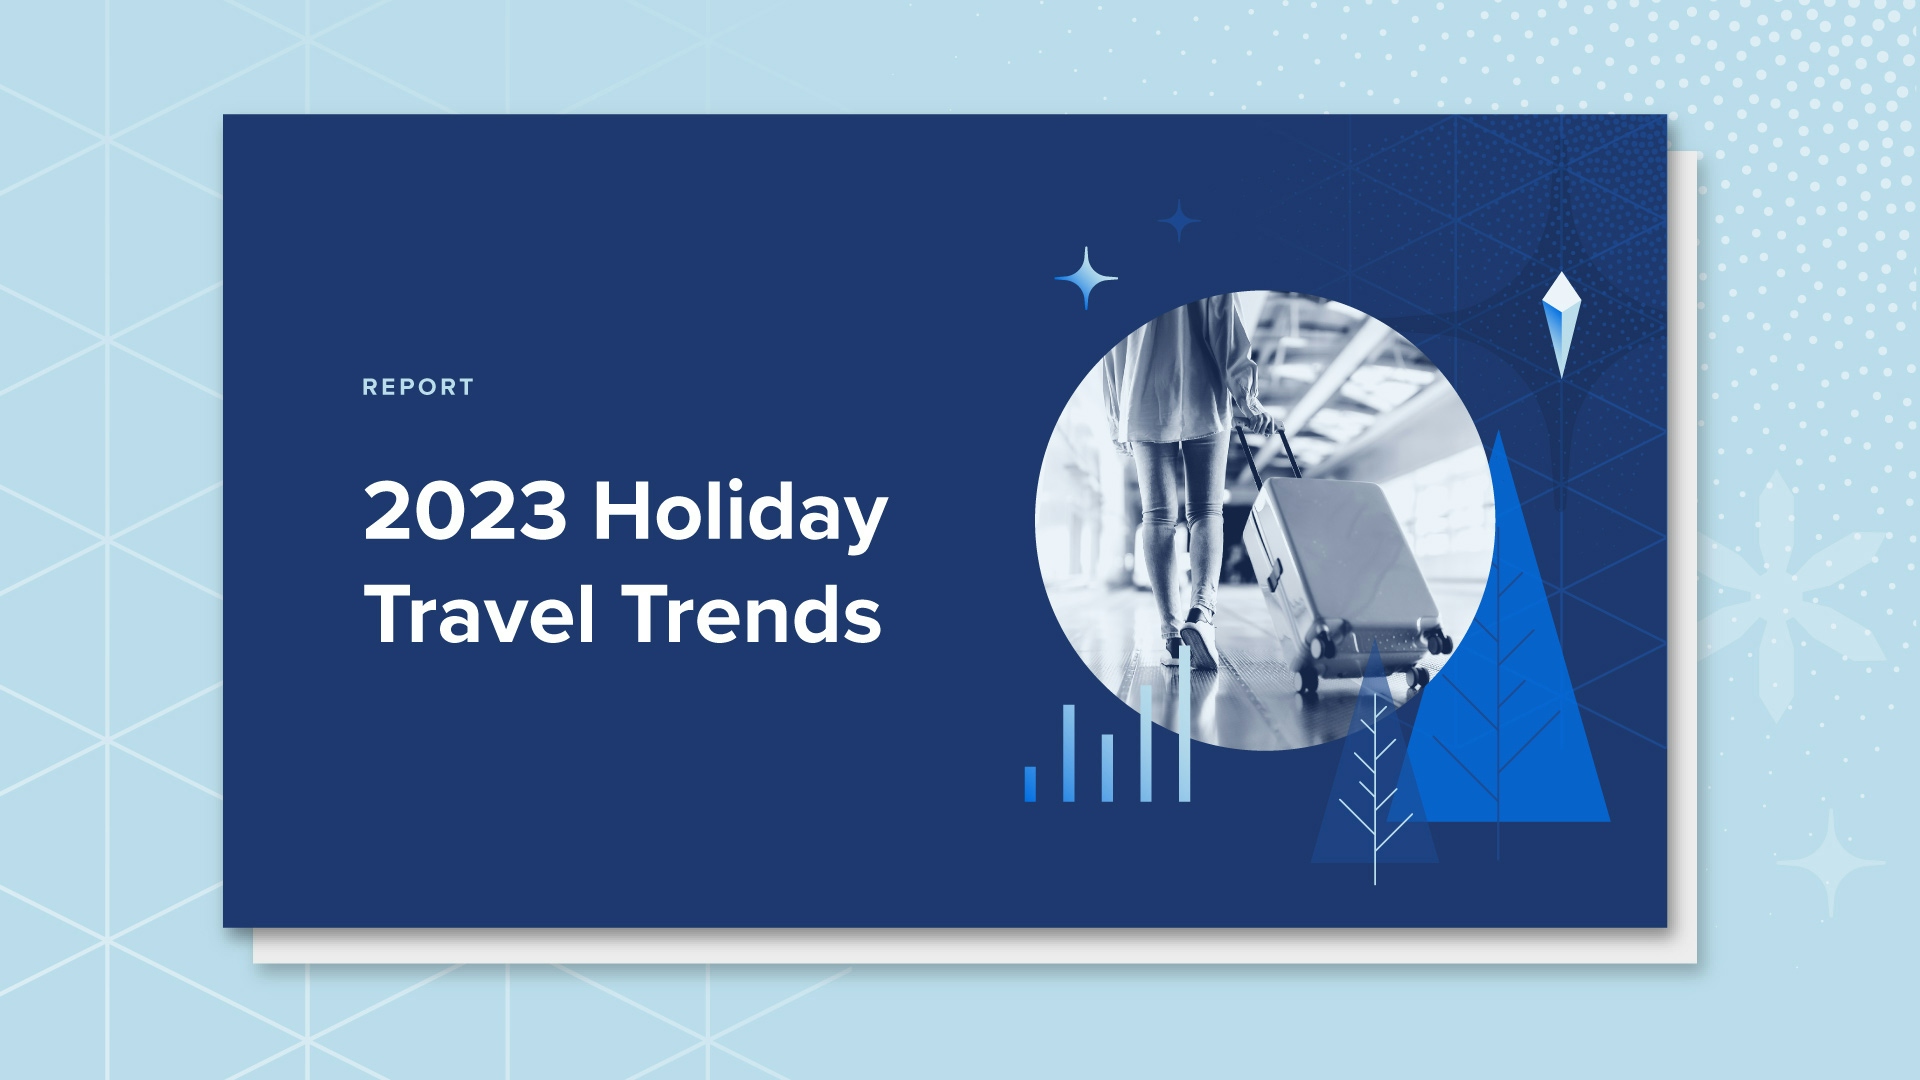 Download the Report: 2023 Holiday Travel Trends